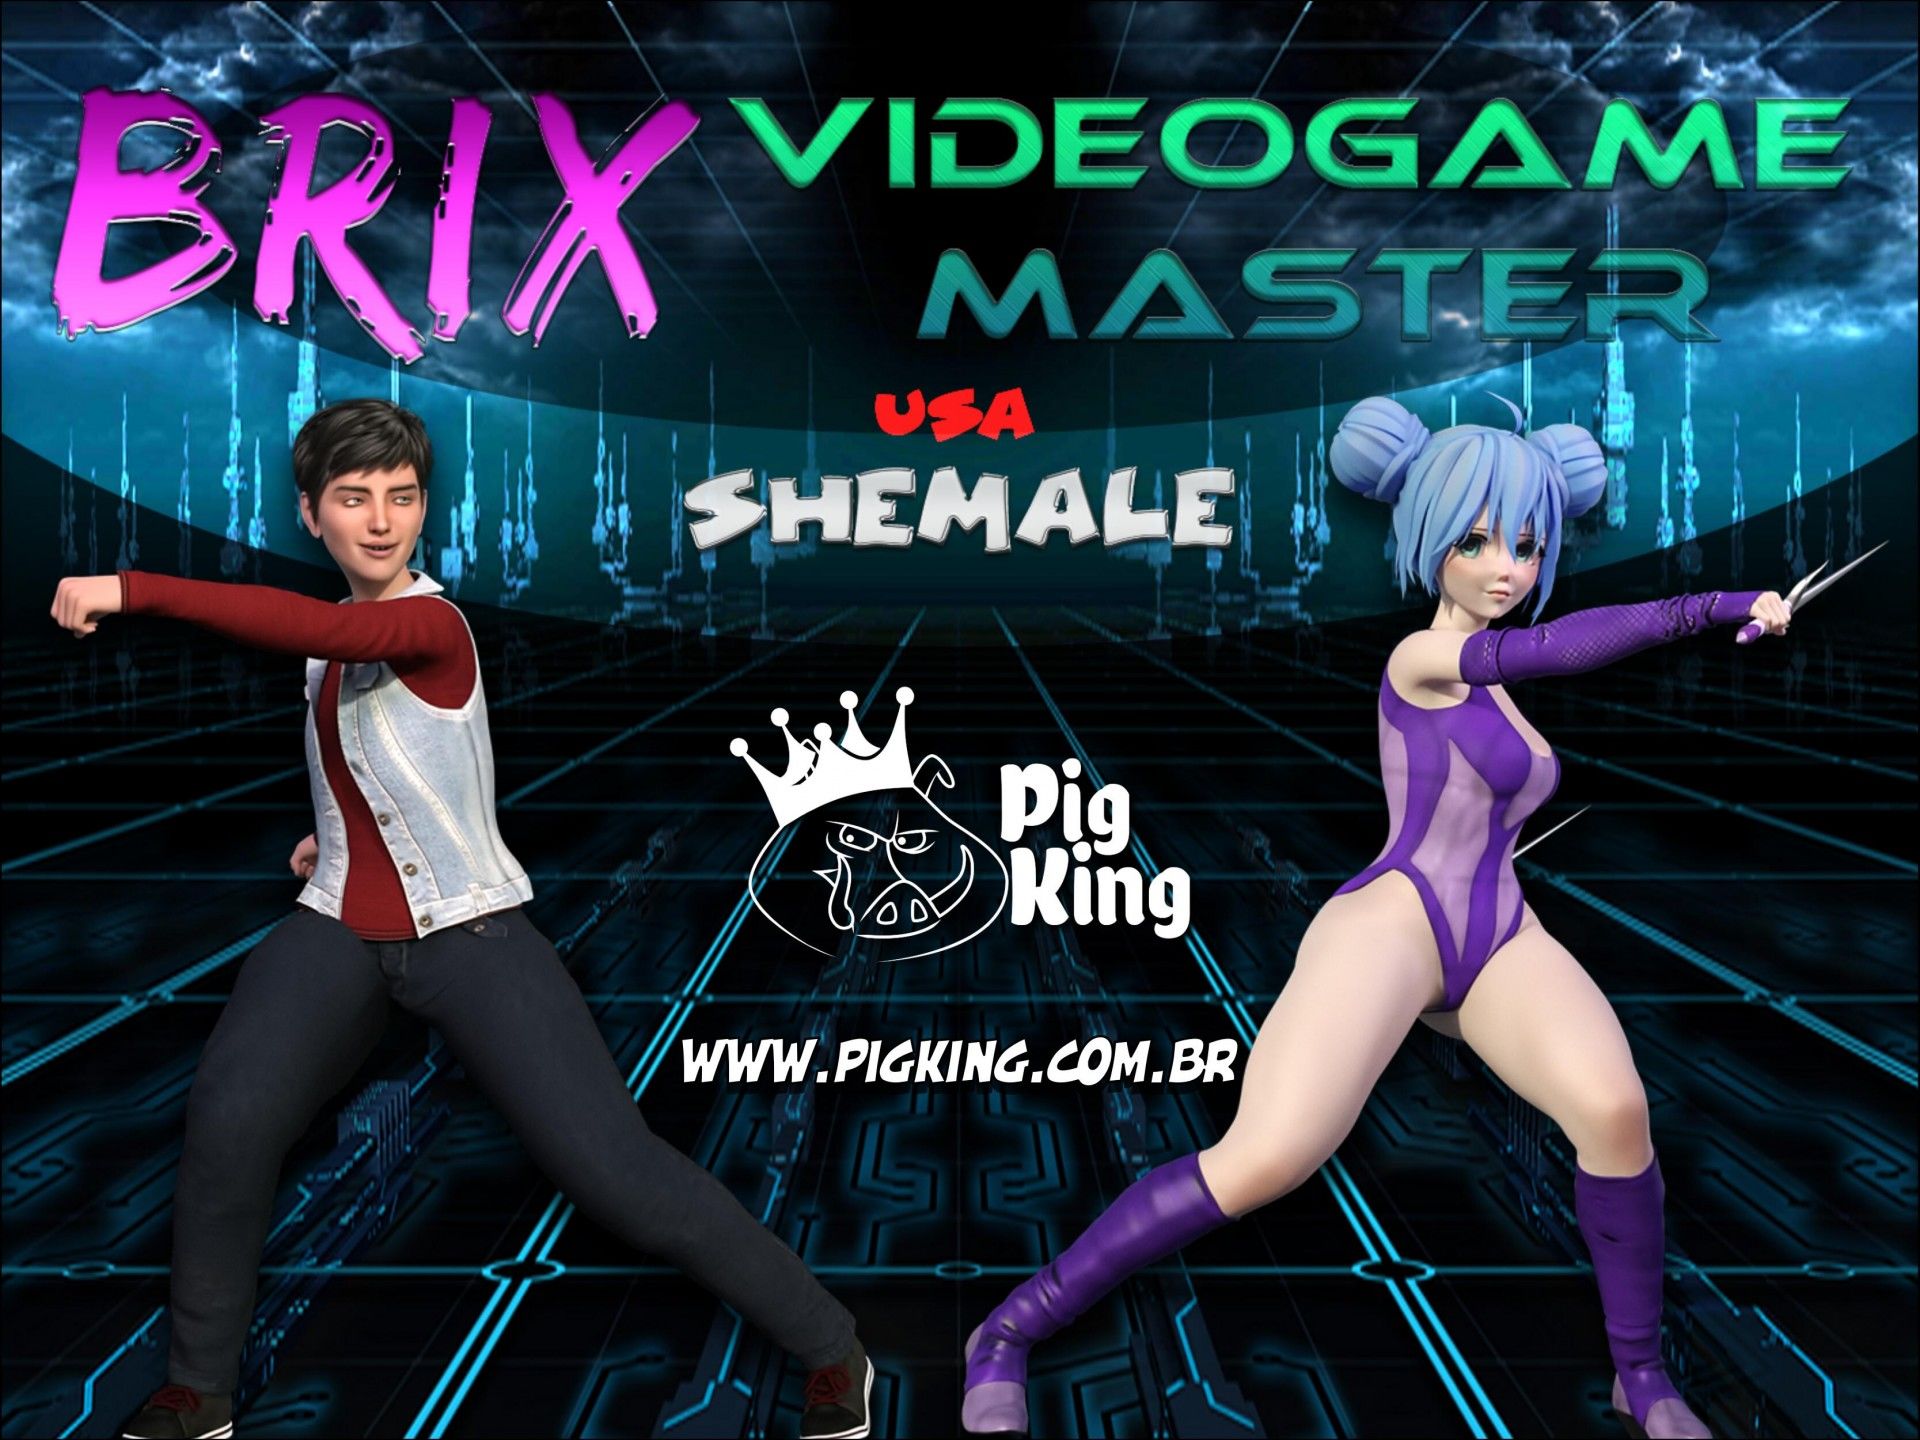 Brix, Videogame Master PigKing Shemale page 1